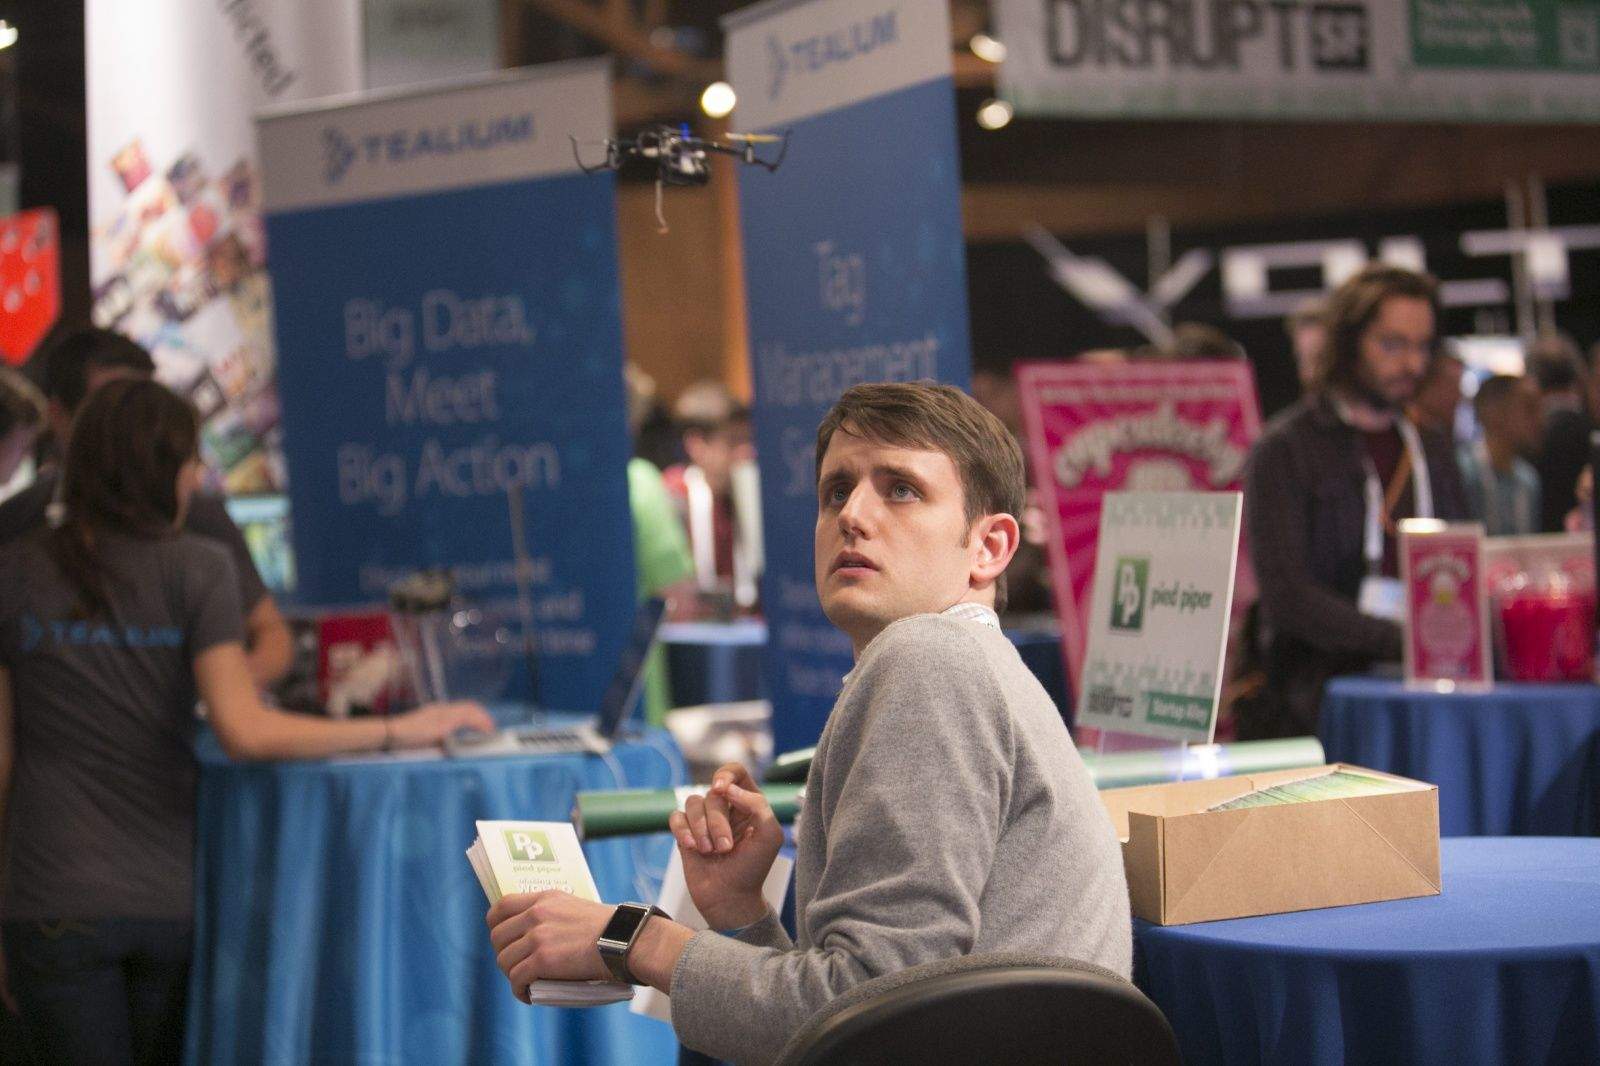 Jared and the rest of the Silicon Valley guys face a new challenge at TechCrunch Disrupt. Photos courtesy HBO